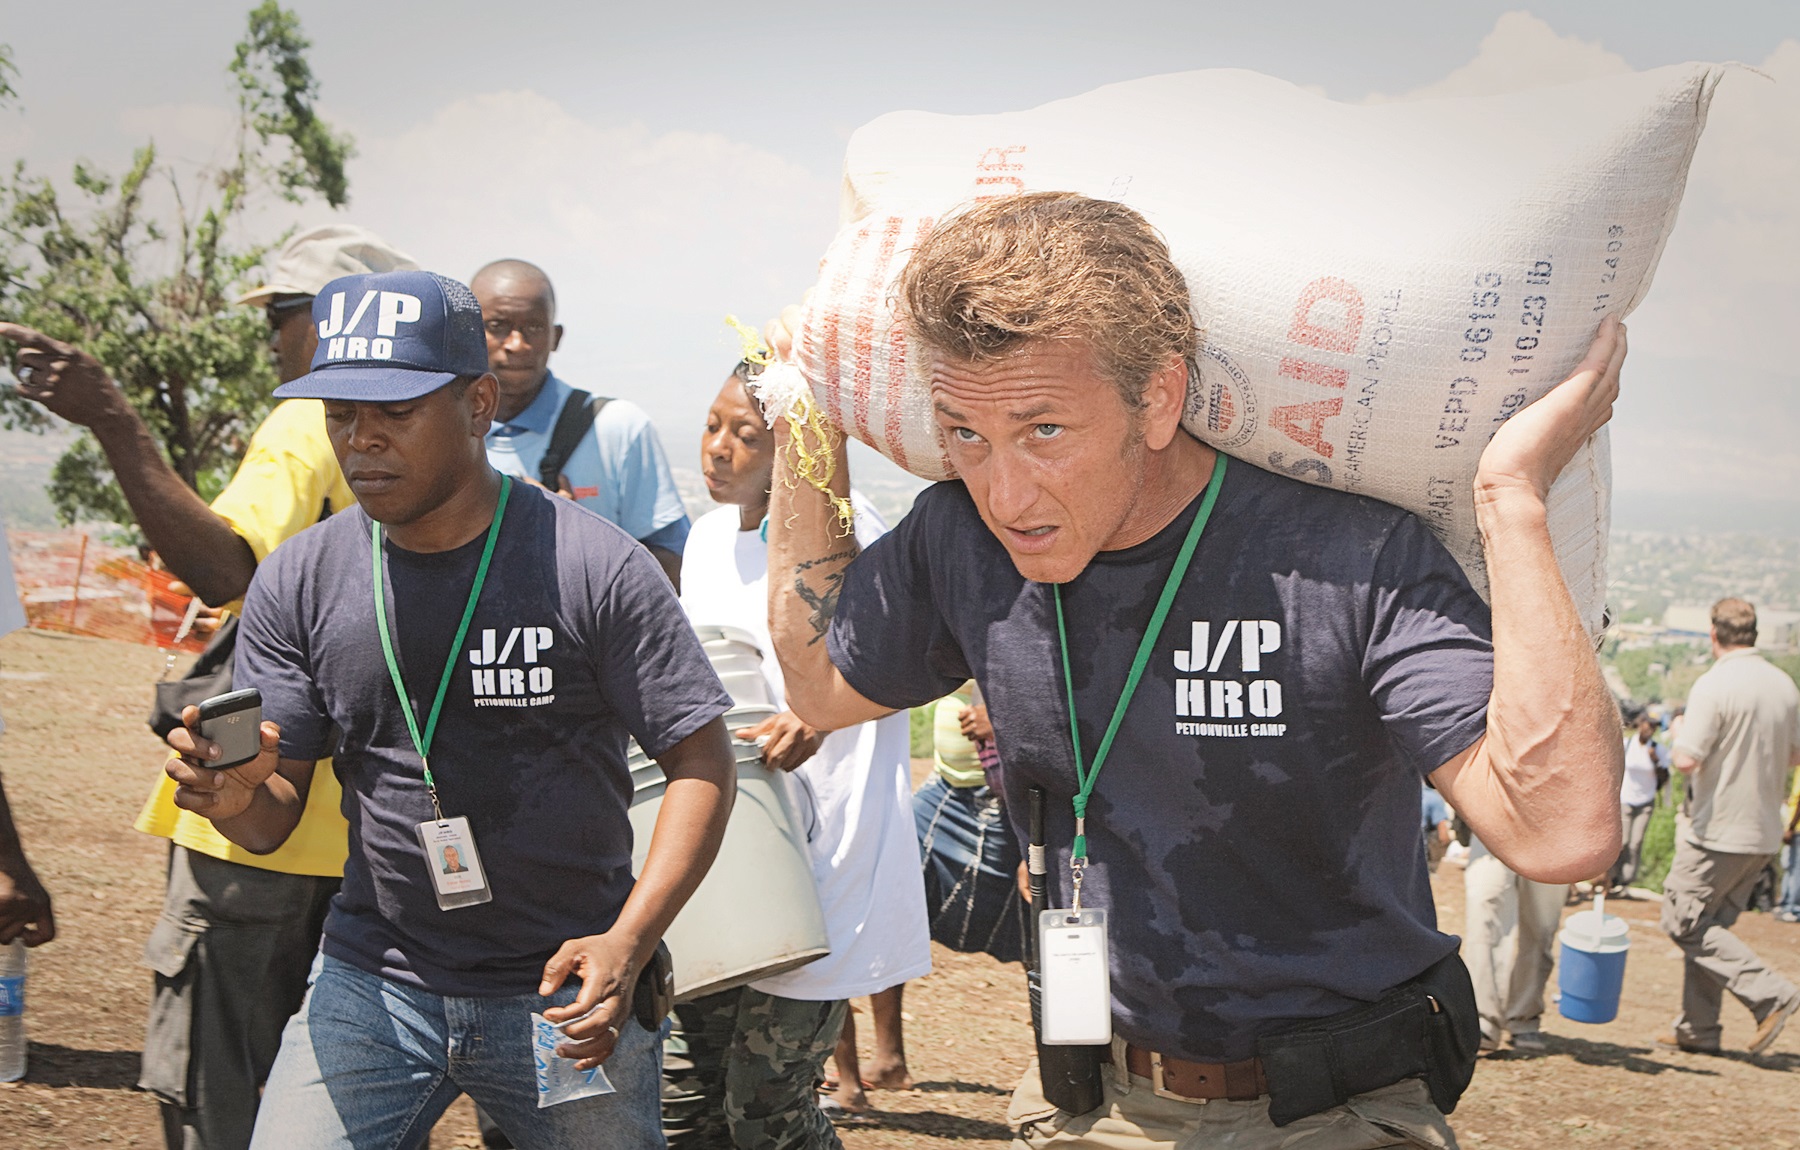 PETIONVILLE, HAITI - APRIL 10:  Actor Sean Penn carries belongings of a shelter camp resident as they are prepared to be relocated to a new camp April 10, 2010 in Petionville, Haiti. Residents of the Petionville Club camp are being relocated to a new camp at Corail Cesselesse due to risks of flooding and landslides at the current location.  (Photo by Lee Celano/Getty Images)